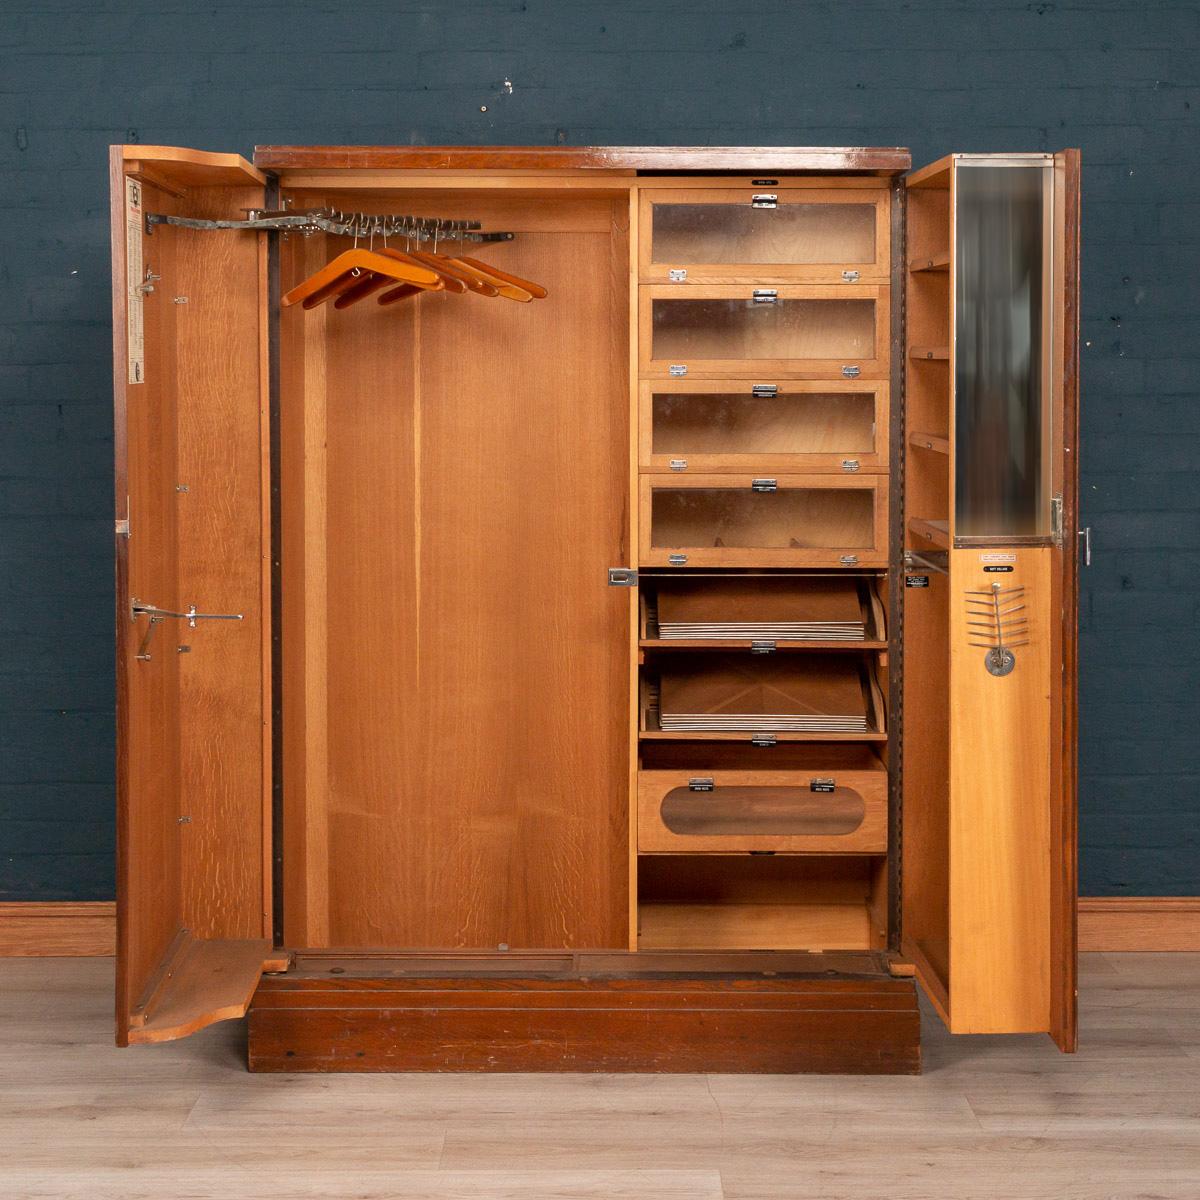 Rare Art Deco wardrobe by Compactom, England 1930s. Beautiful piece of furniture, looking very anonymous when closed but once opened reveals a wonderful array of compartments for the gentleman’s wardrobe of the period, including sections for shirts,